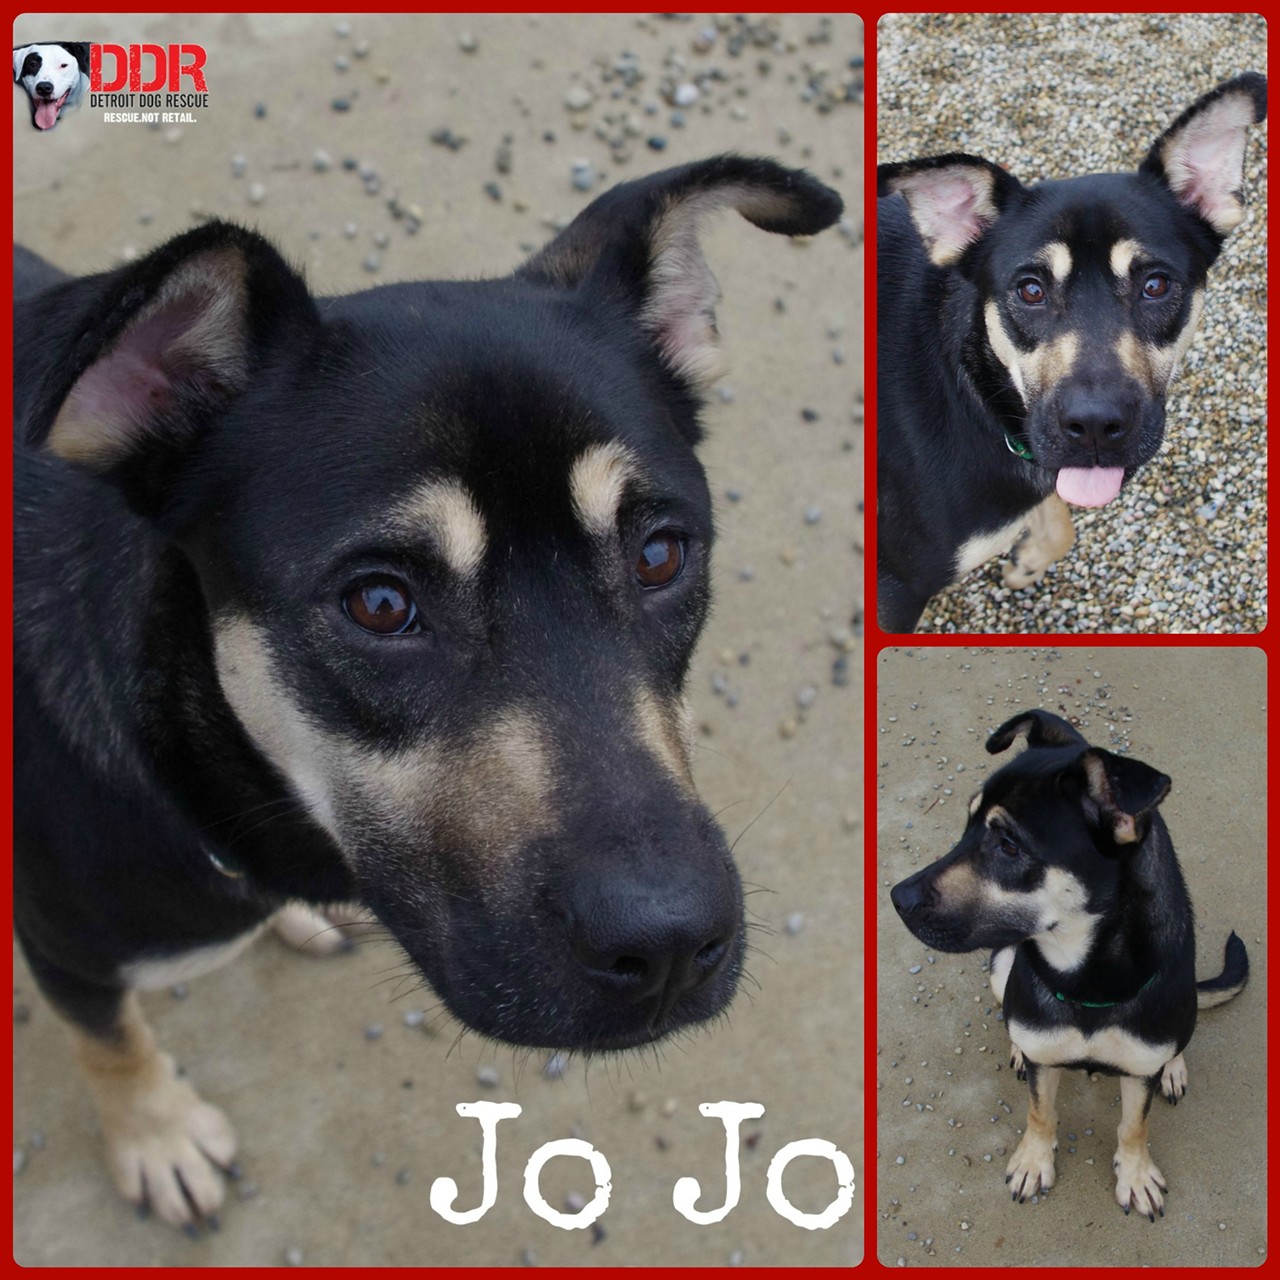 Jojo is a two year old Rottweiller Shepherd that will be available for meet and greets mid January.